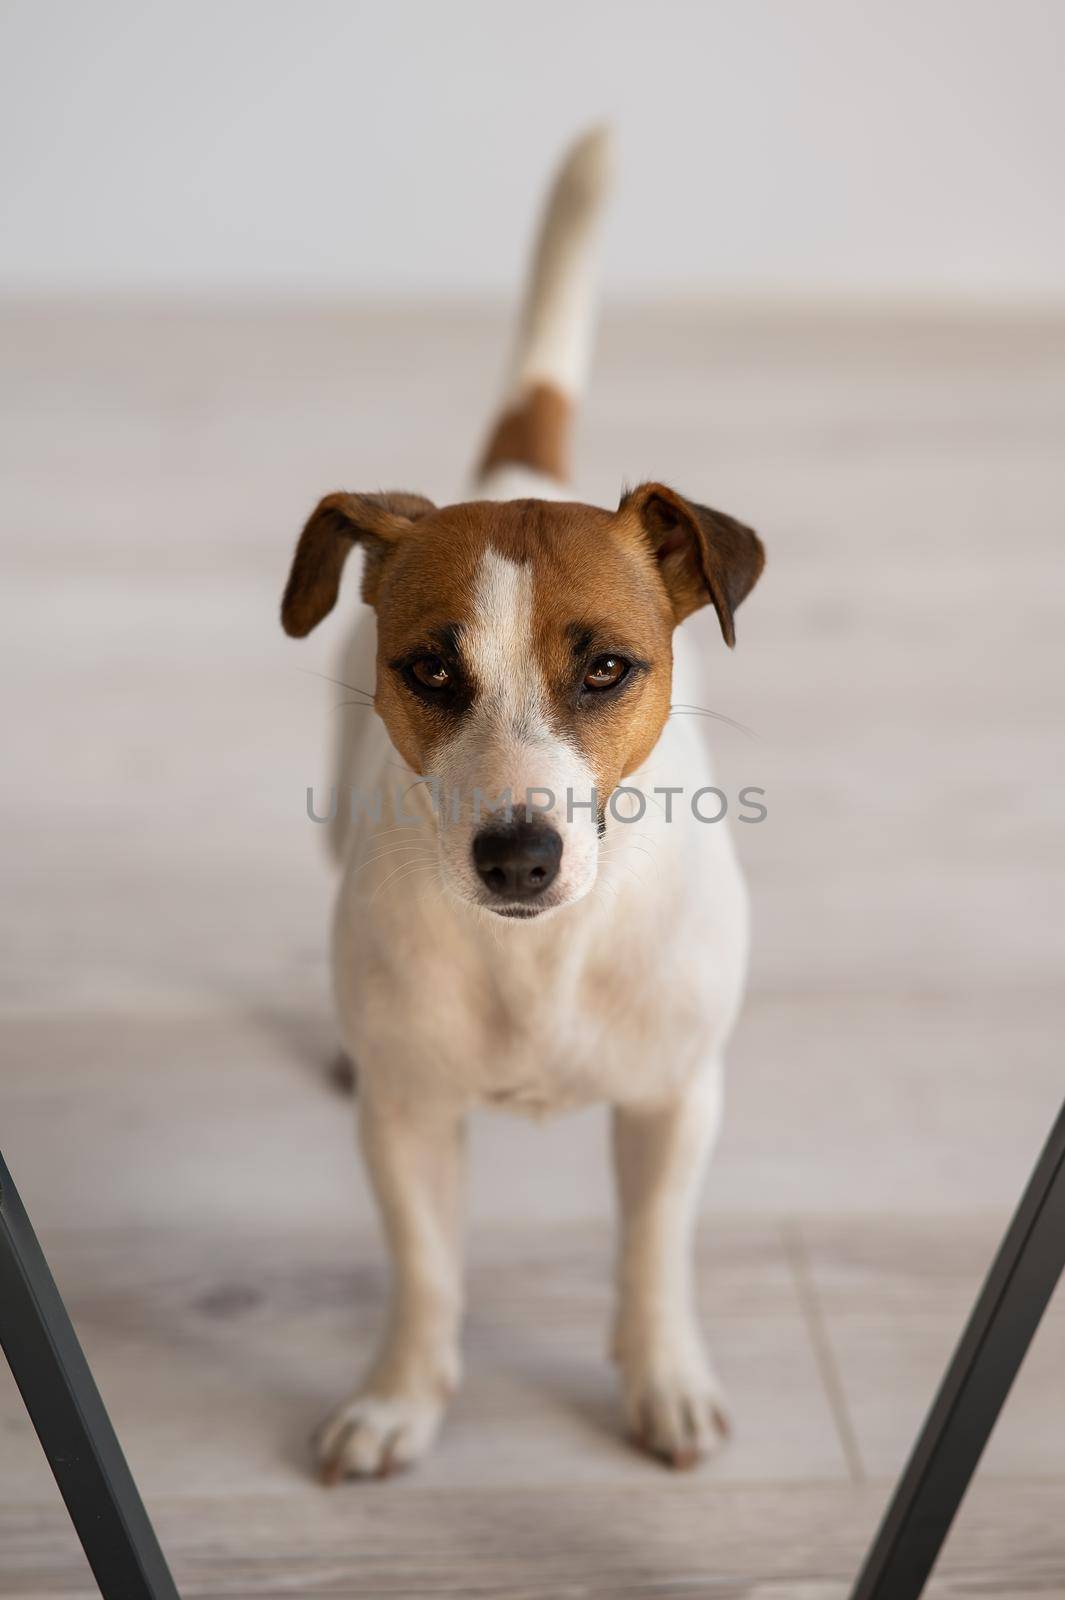 Jack russell terrier dog on a wooden floor